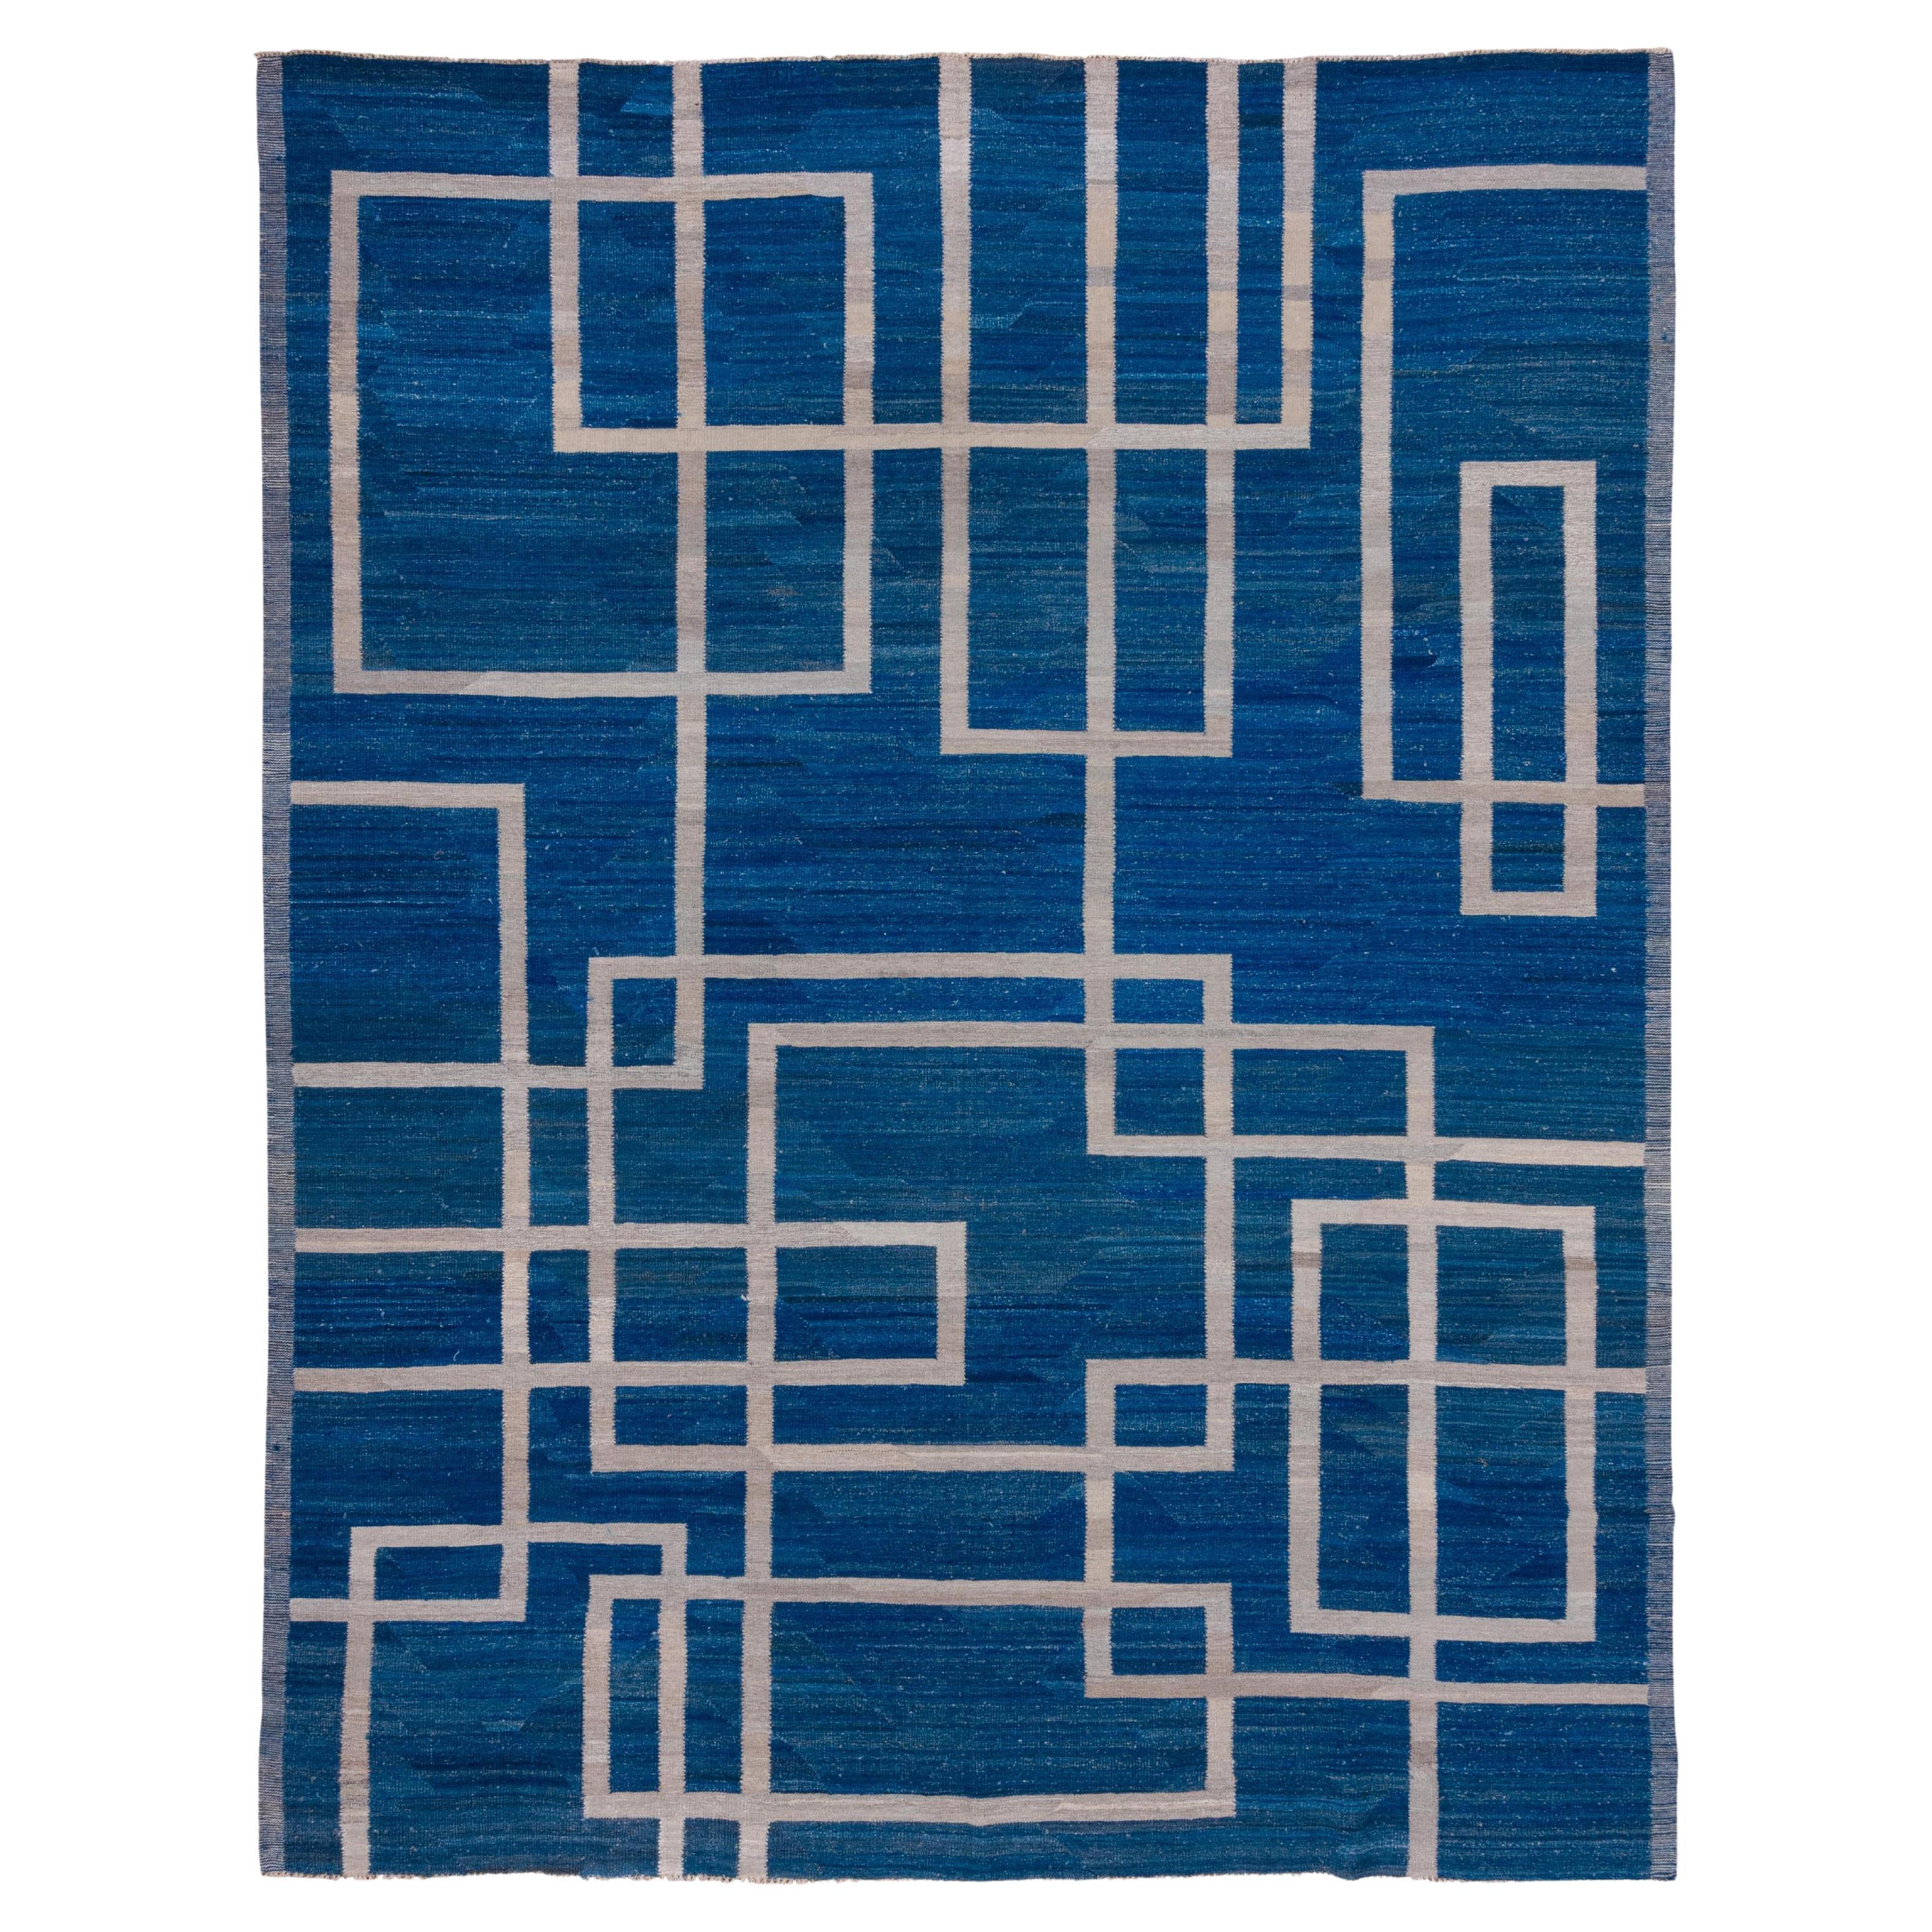 Modern & Geometric Royal Blue Flatweave Rug with Gray & Taupe Accents